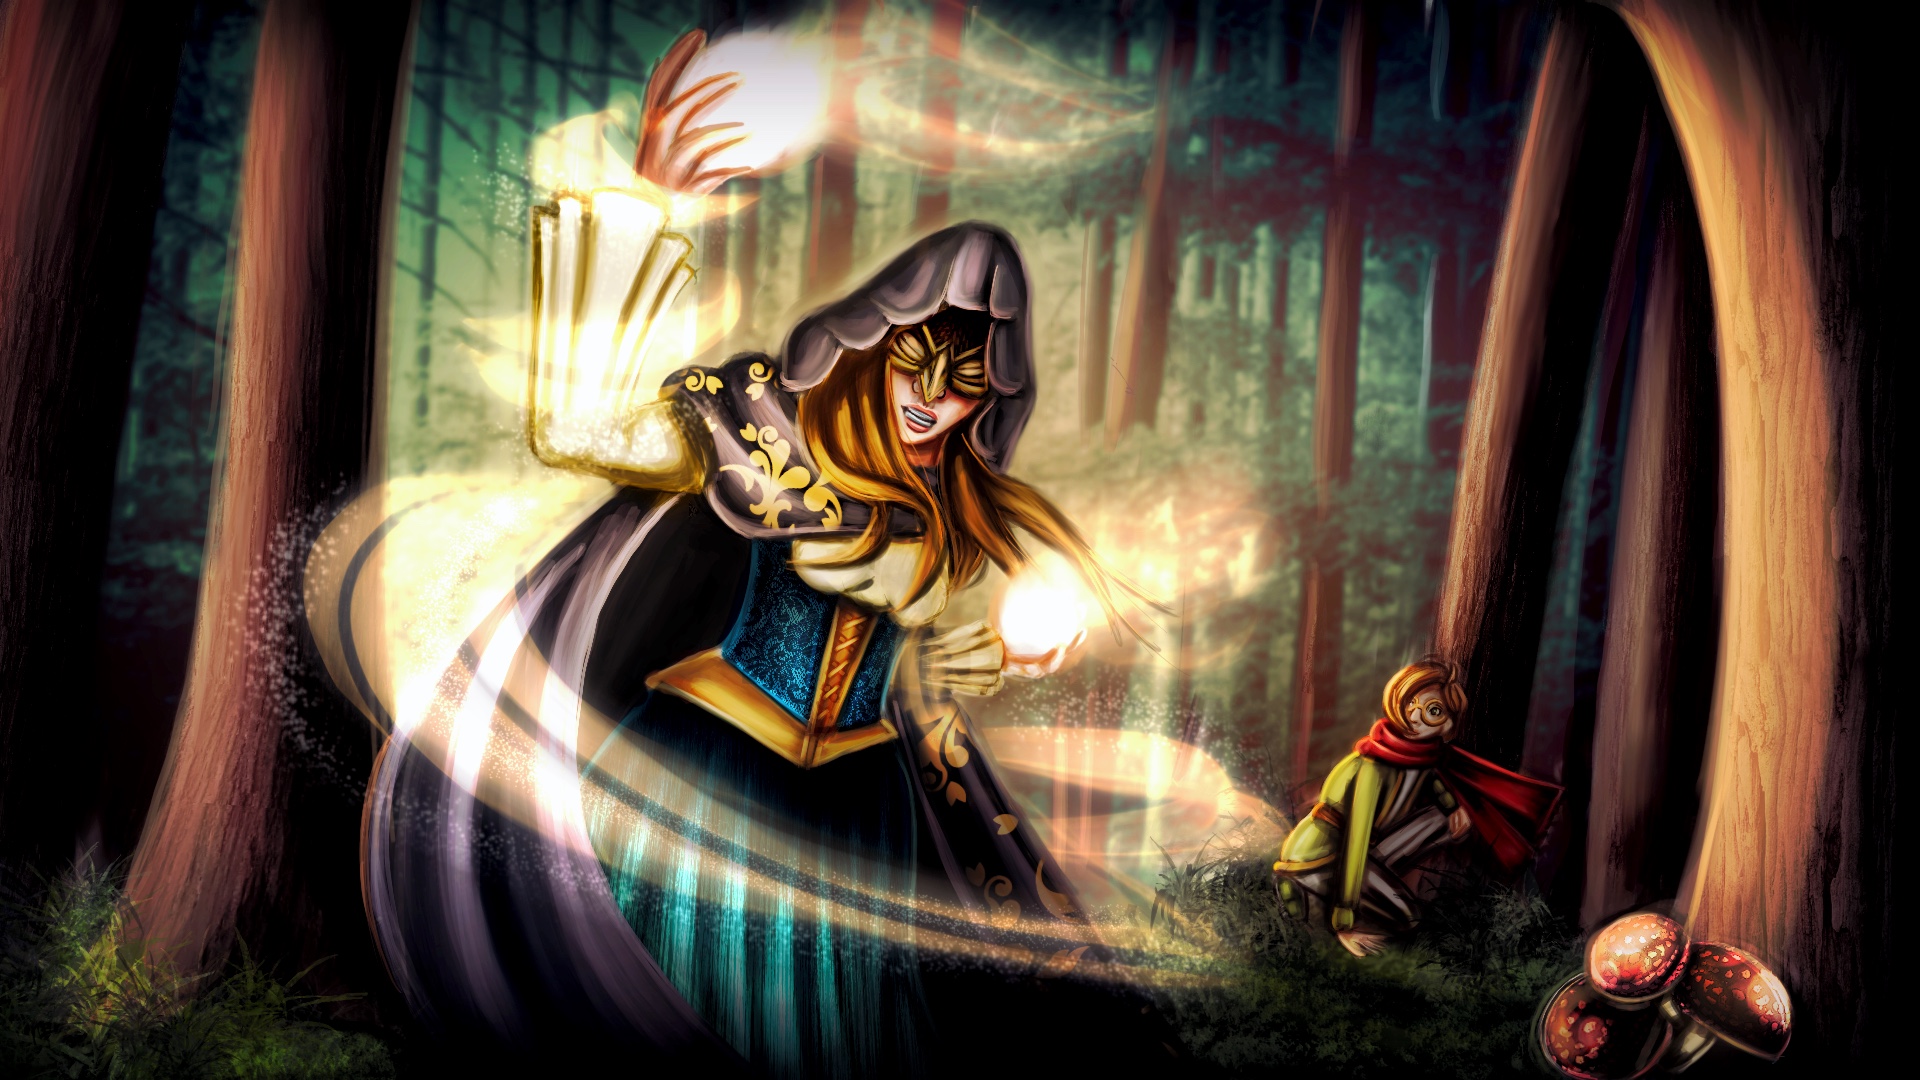 A landscape digital painting showcasing two figures, one dressed royally in the foreground surrounded by bright lights, whilst behind her slouches a younger, less dignified figure. They are both situated in a forest.